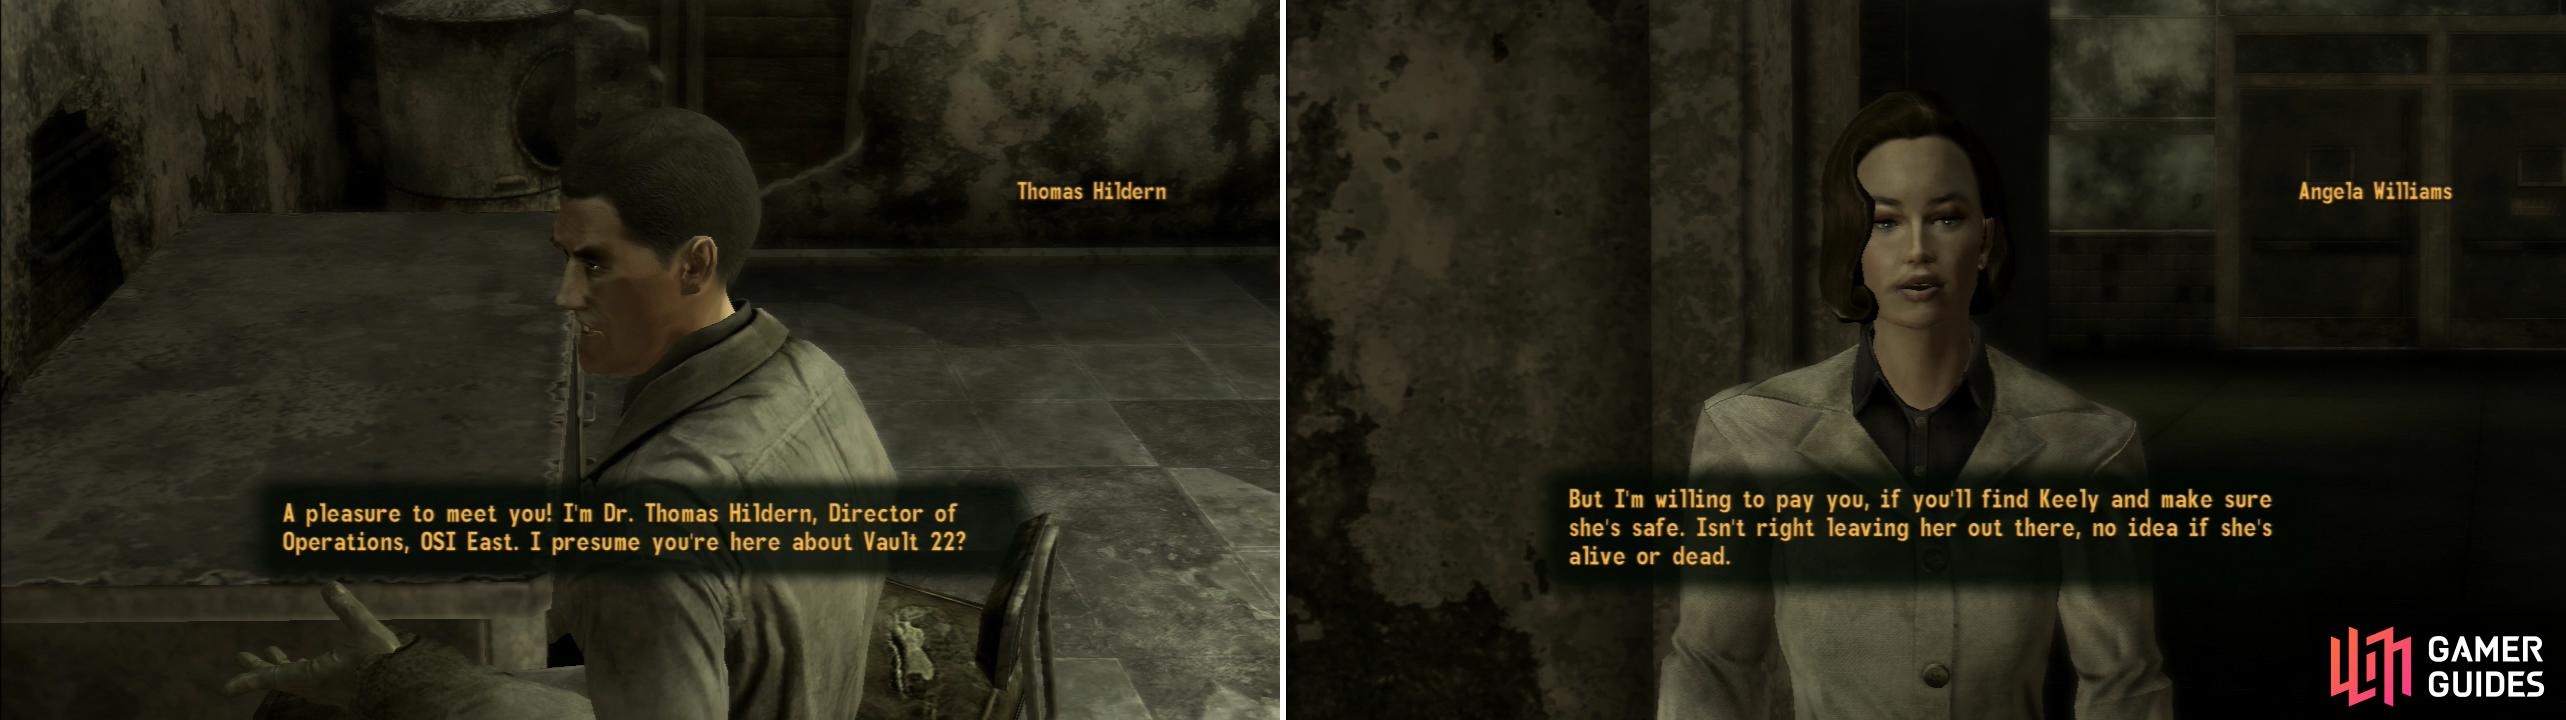 Visit Thomas Hildern at Camp McCarran and give him the Crimson Caravan invoice (left), and hear how his request to investigate Vault 22. After your conversation with Hildern, his assisstant Angela Williams will warn you about Hildren’s job (right).